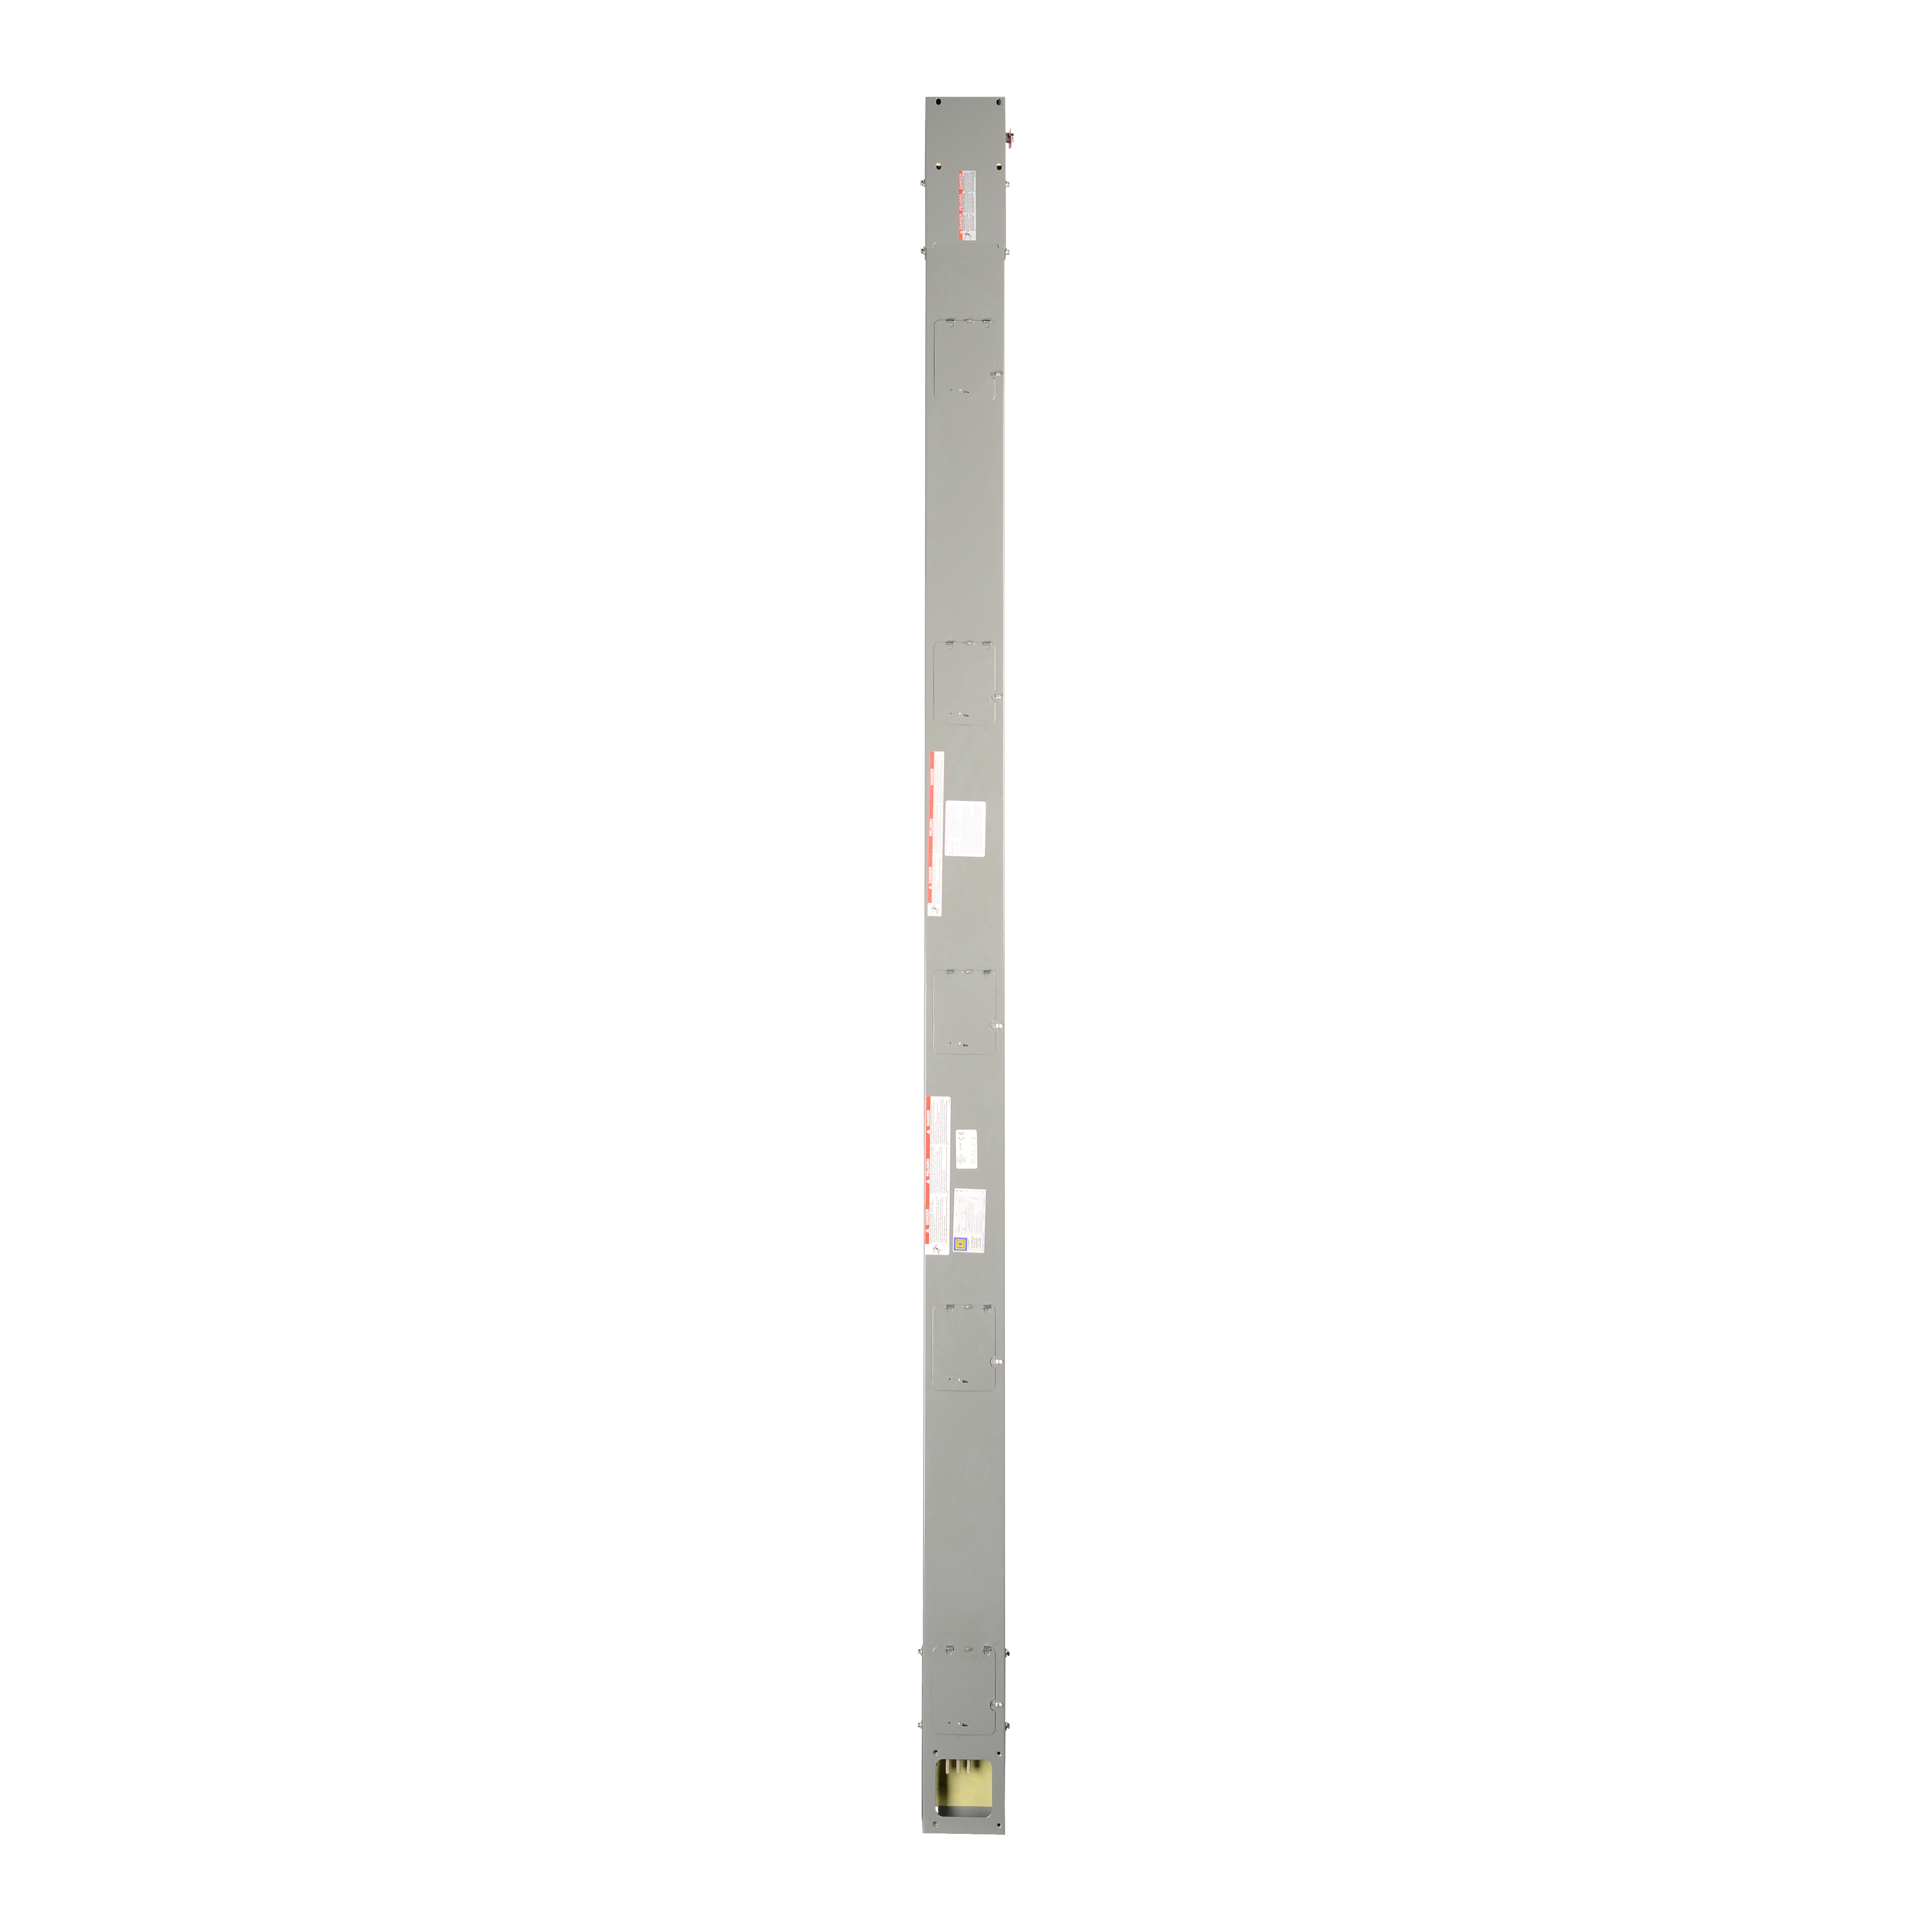 Straight length, I-Line Busway, 600A, 600VAC, 3 phase, 4 wire, without protection, Al, plug-in, 10ft